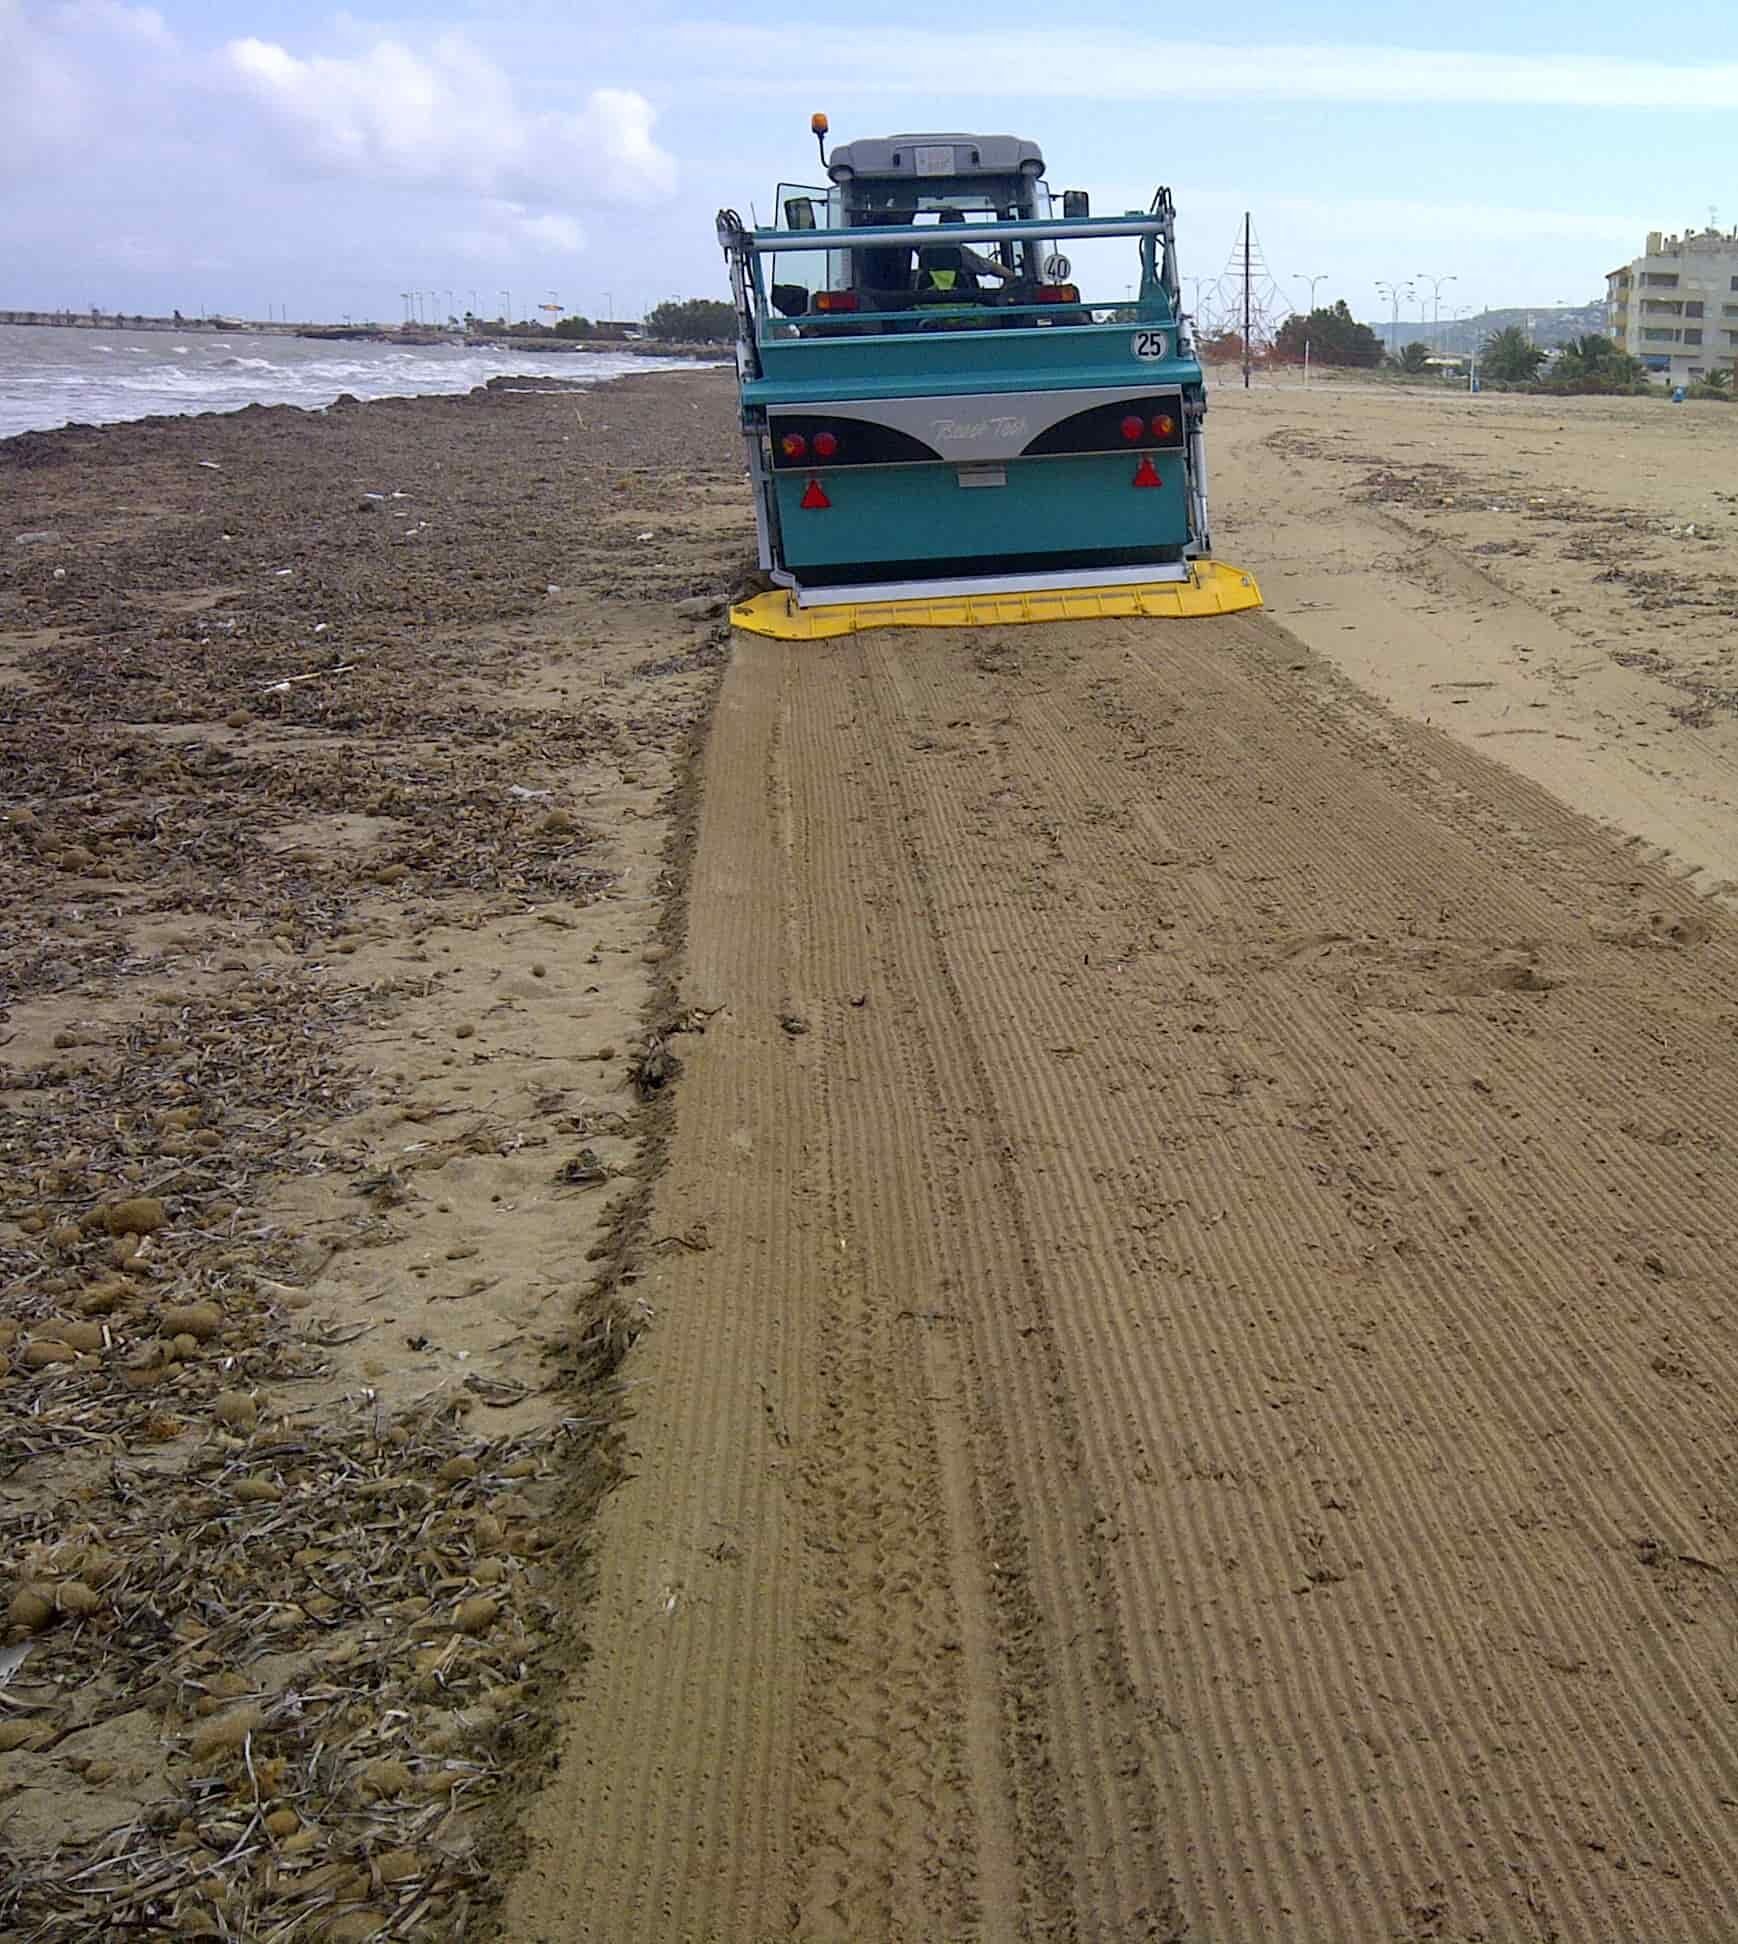 Pulled Beach Cleaner BeachTech Demonstration Sand Cleaning Seagrass 